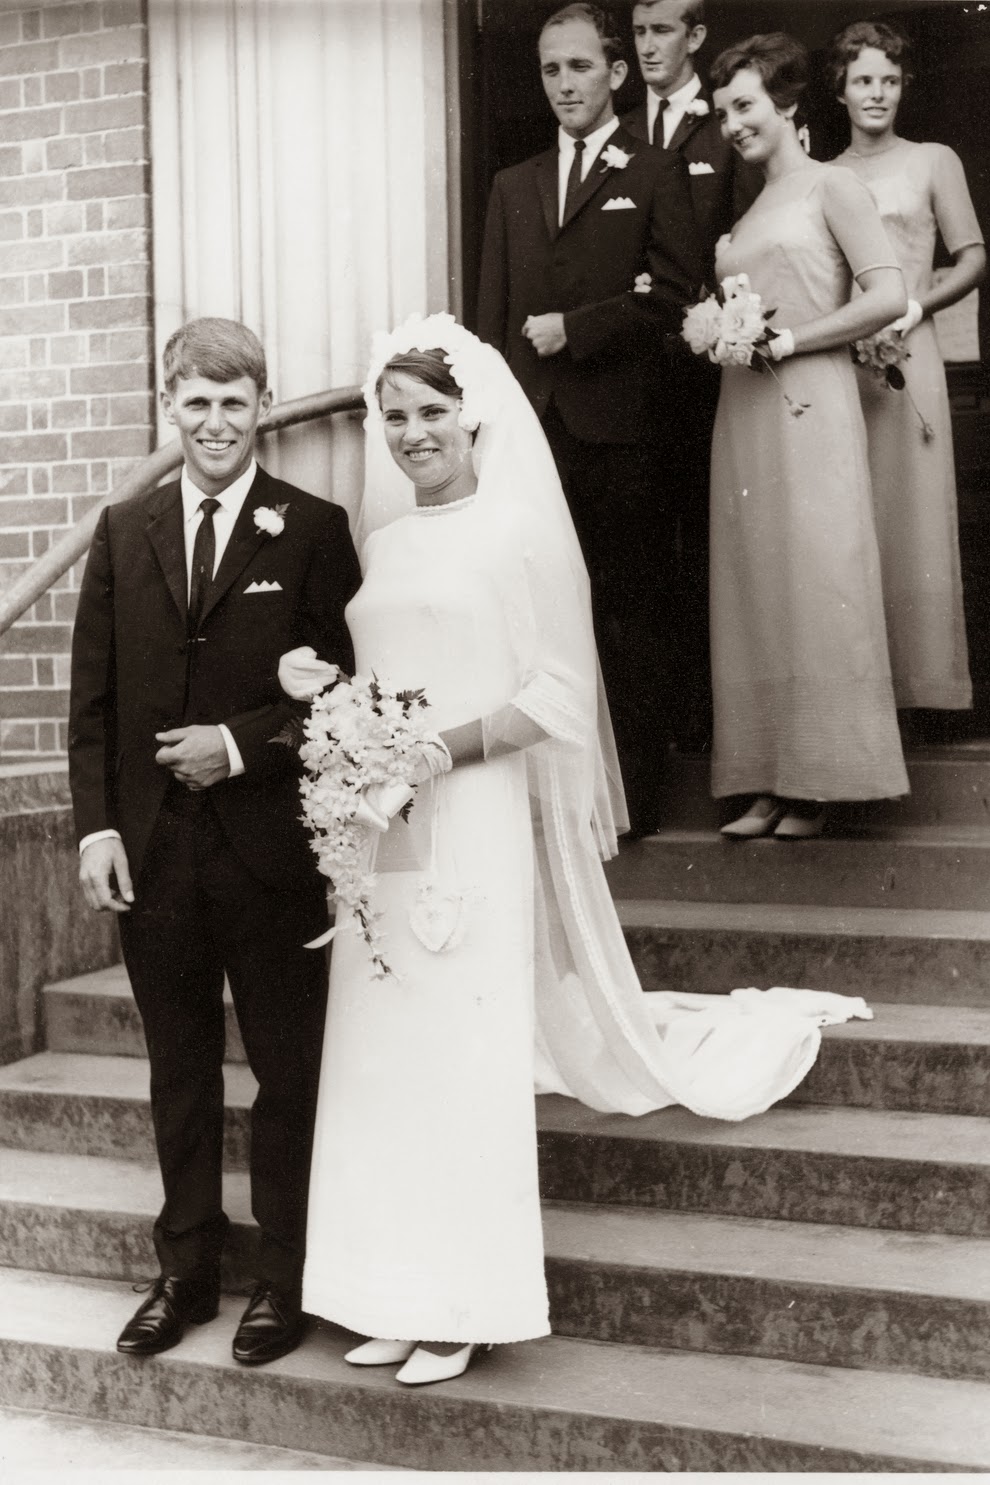 Adorable Real Vintage Wedding Photos From the 1960s